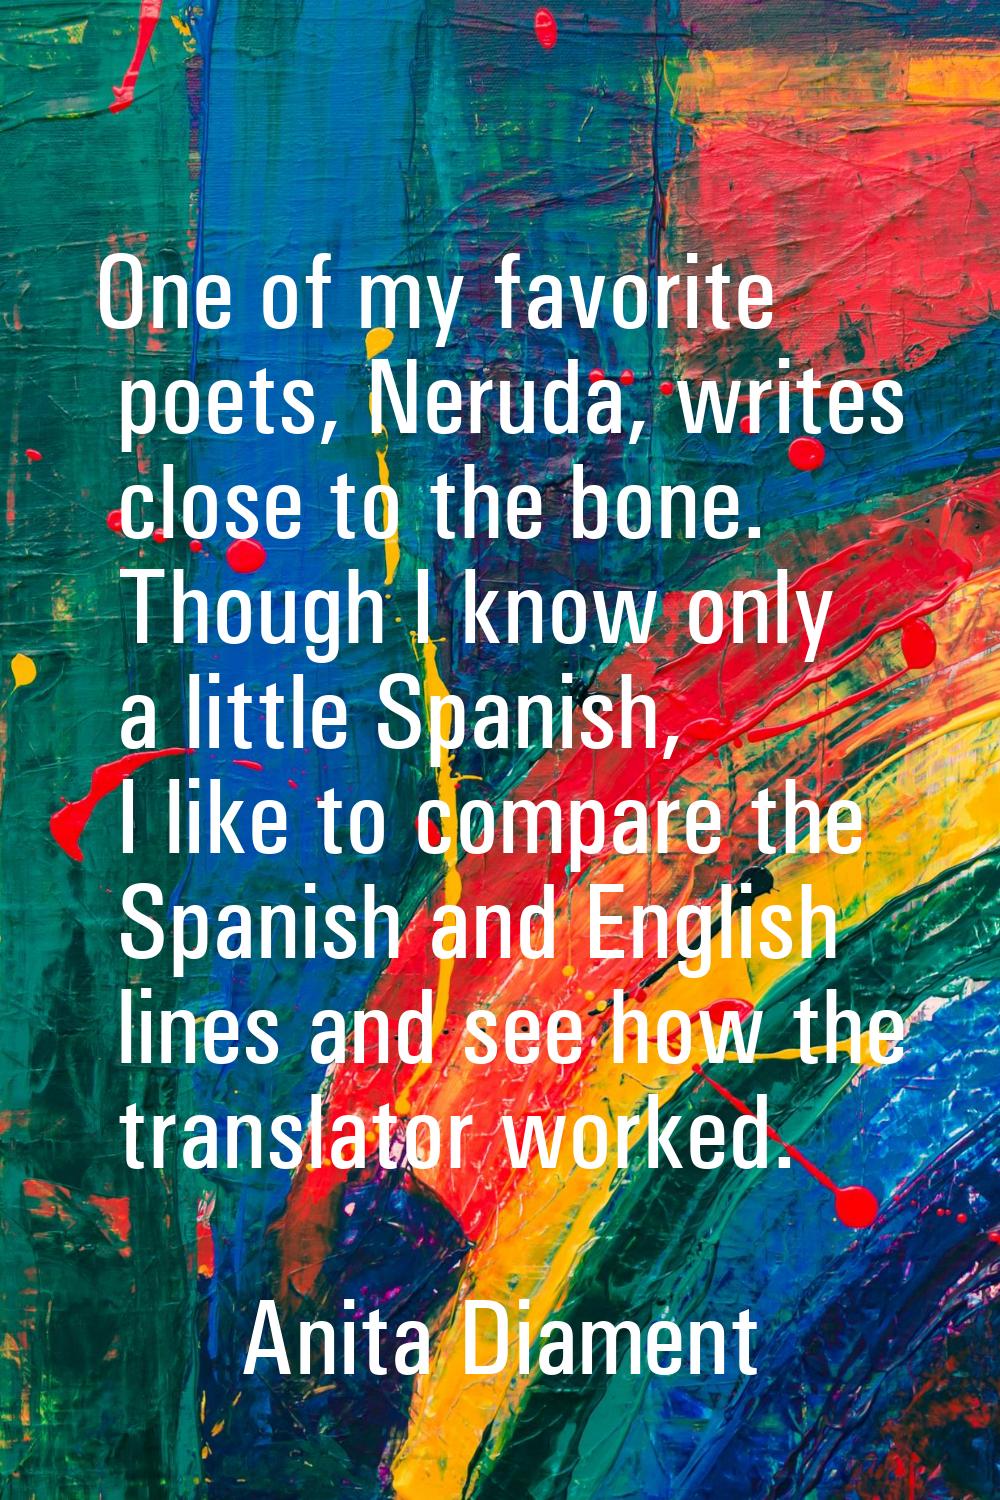 One of my favorite poets, Neruda, writes close to the bone. Though I know only a little Spanish, I 